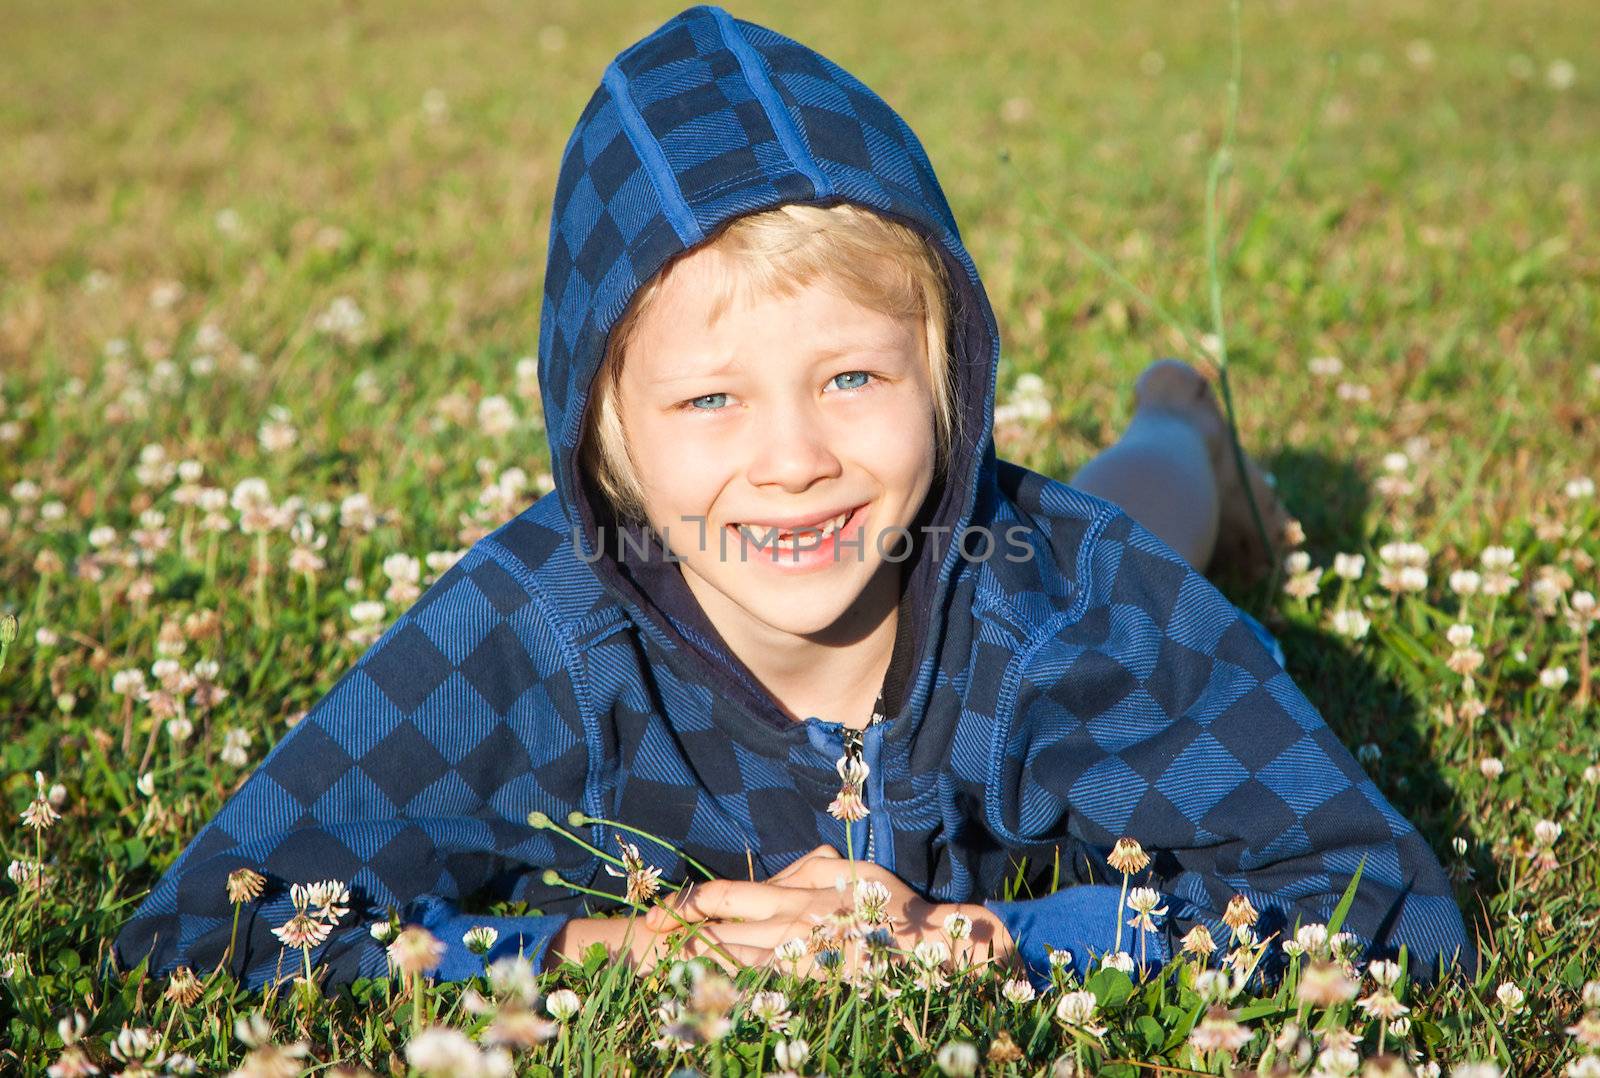 Smiling young boy lying in grass smiling by Jaykayl